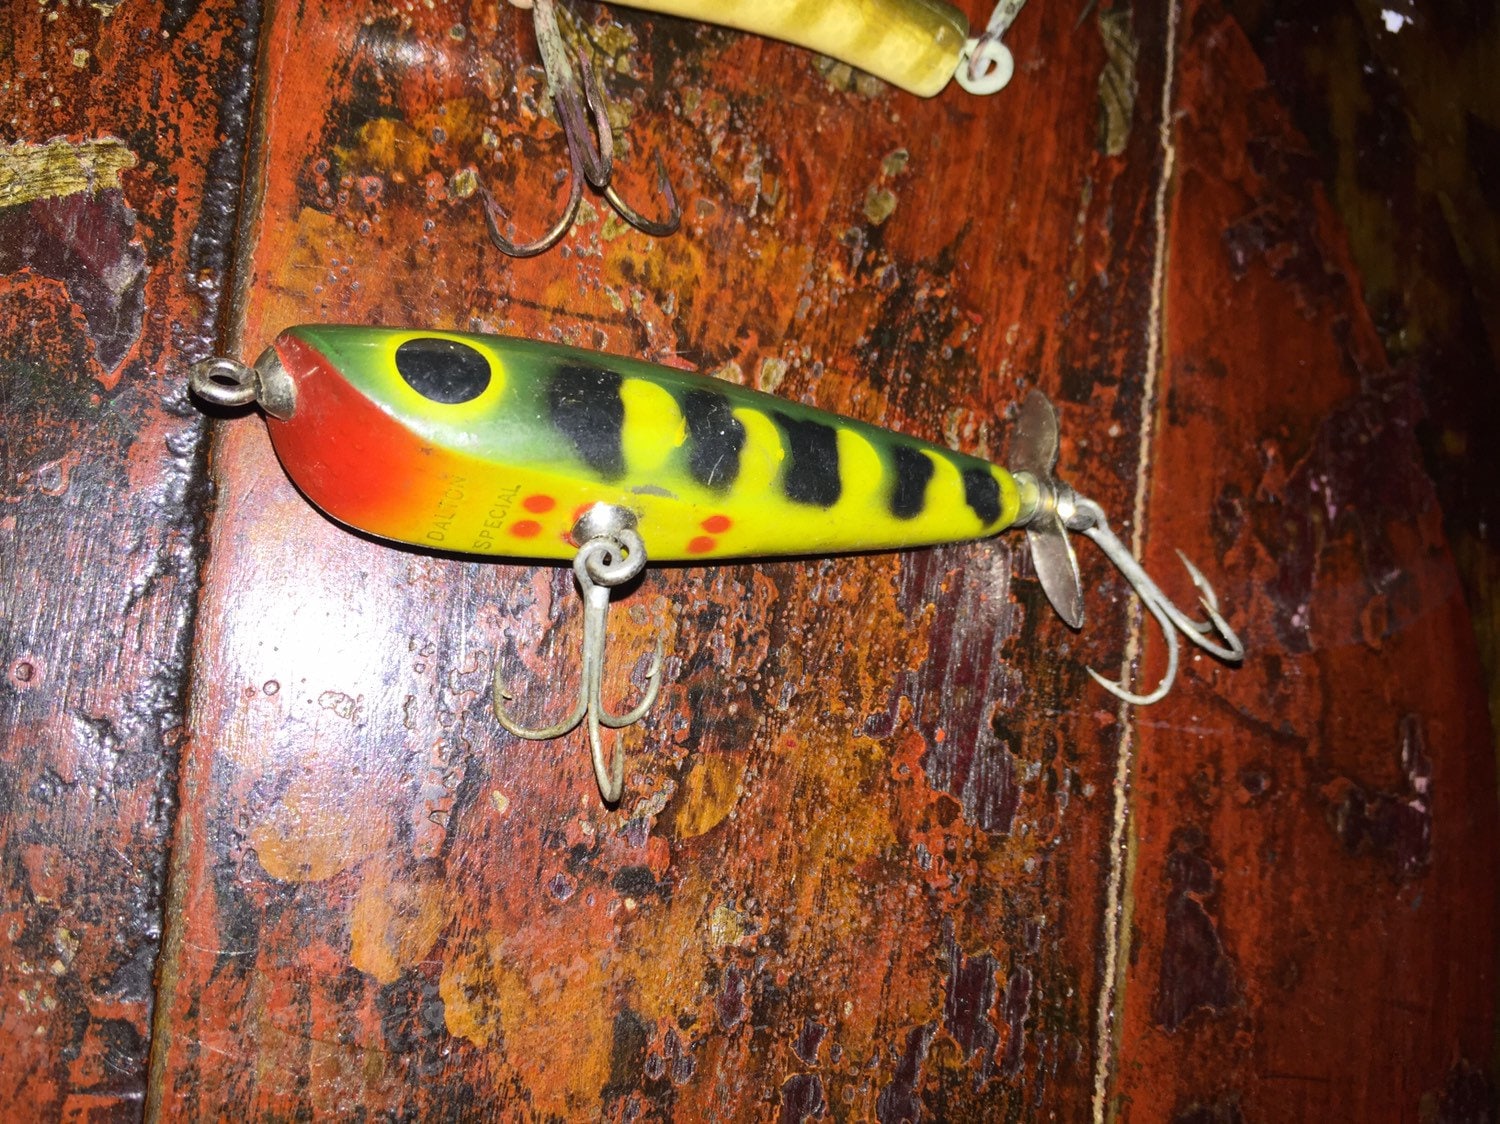 Set of 6 Antique/vintage Fishing Lures, Tackle, Gear, Freshwater